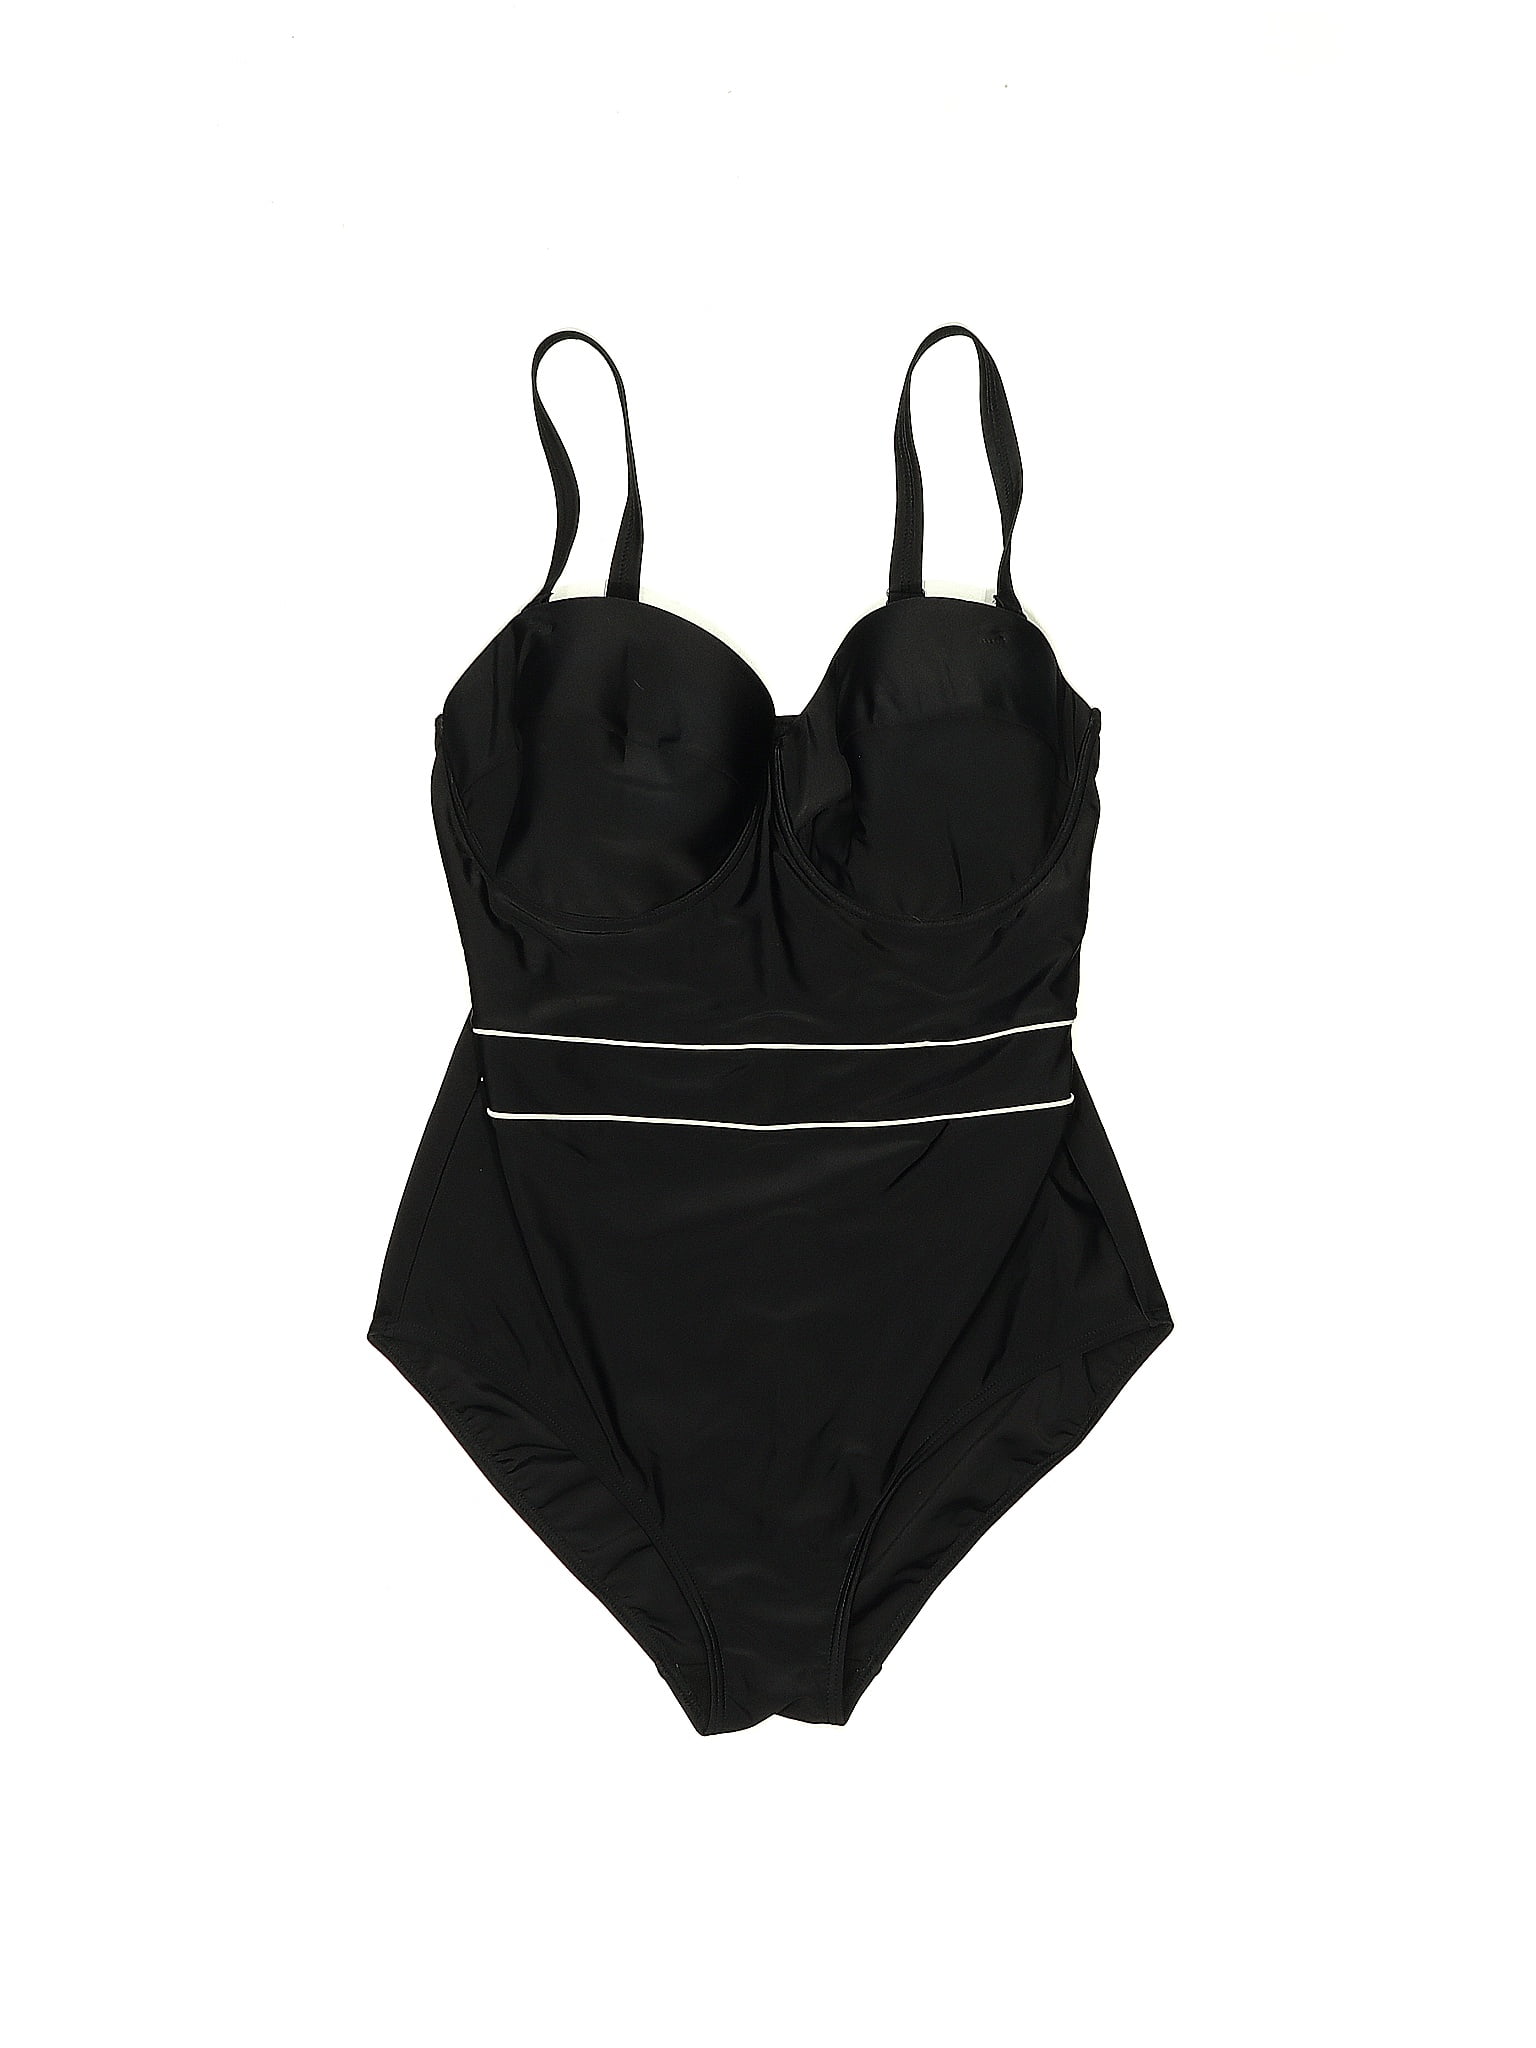 Magisculpt Solid Black One Piece Swimsuit Size 38G - 56% off